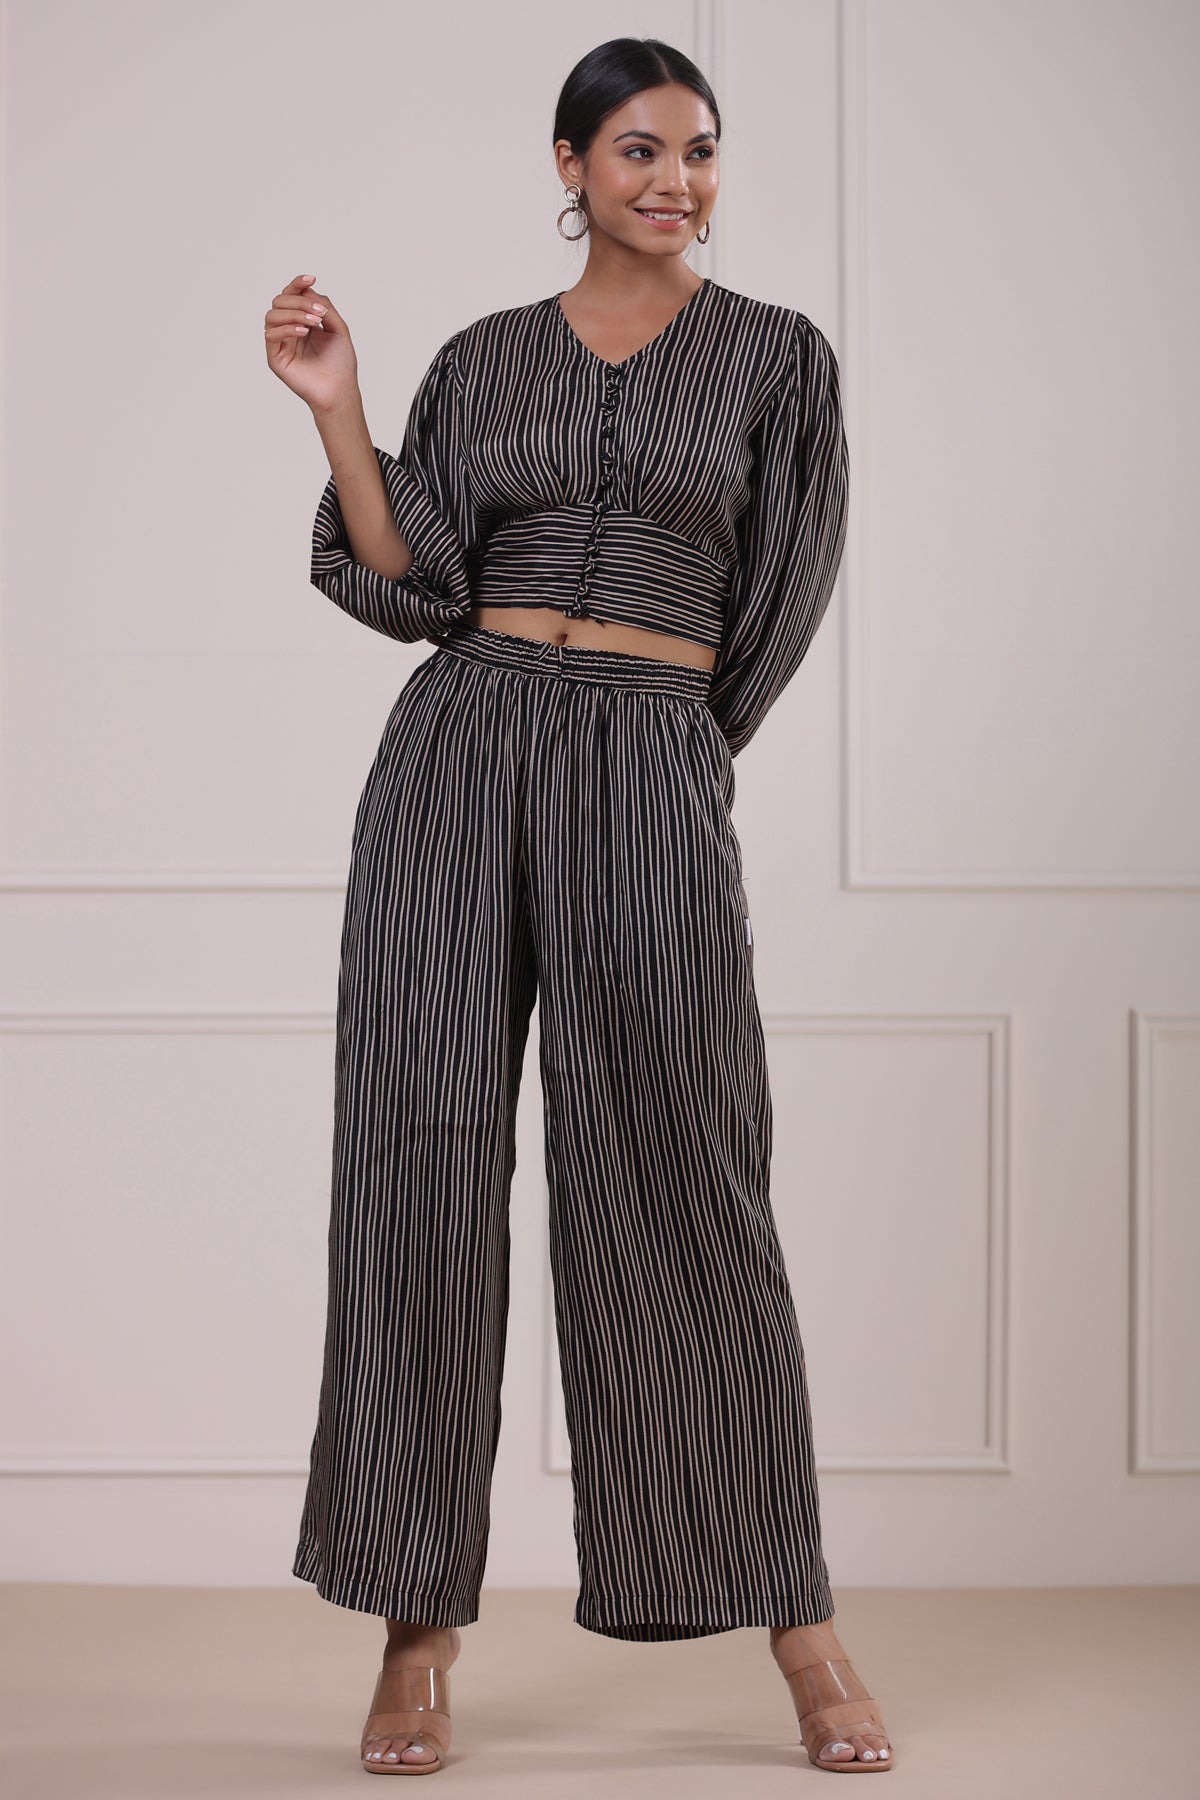 Cosmo stripes on Black Co- ord Set